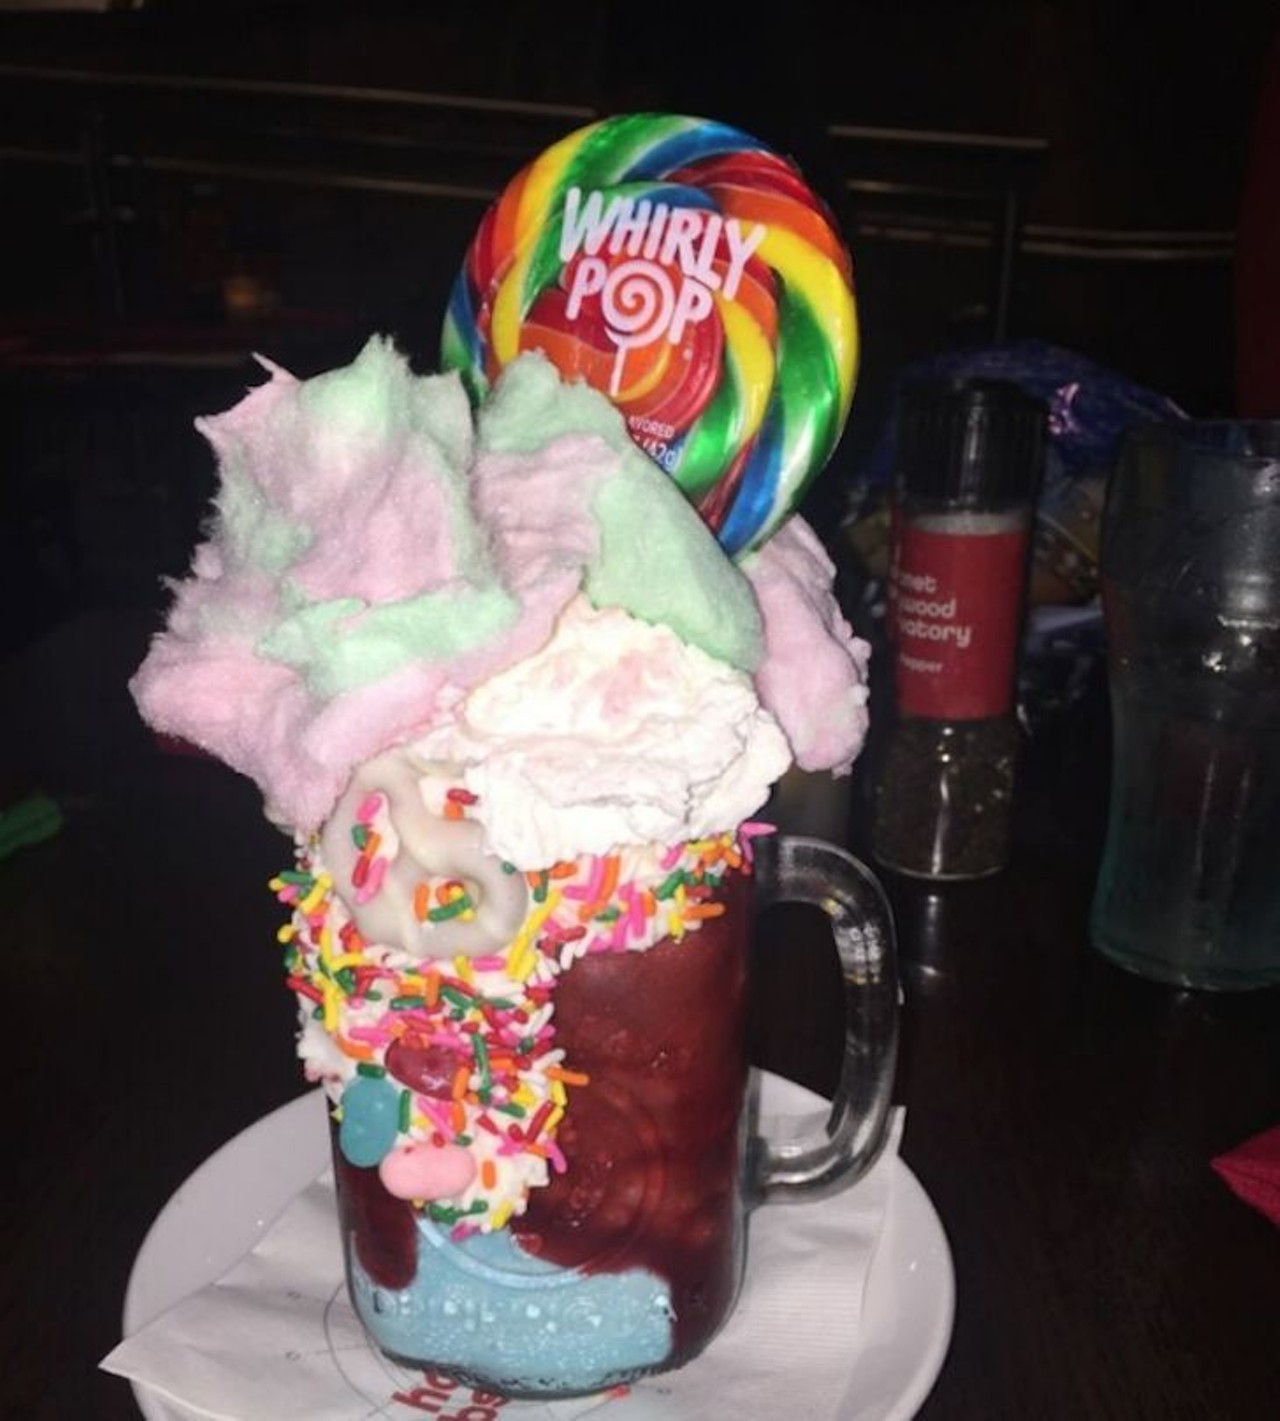 Planet Hollywood: Cosmic Cotton Candy milkshake  
1506 E. Buena Vista Drive, 407-827-7827
Disney Springs has its own slice of Hollywood with food for the stars. Yes, it&#146;s all good, but if you&#146;re looking for extravagance, try the Cosmic Cotton Candy milkshake. This is a cotton candy milkshake with rainbow sprinkles, white chocolate-covered pretzels, actual cotton candy and a giant rainbow lollipop.  
Photo via Yelp/David G.